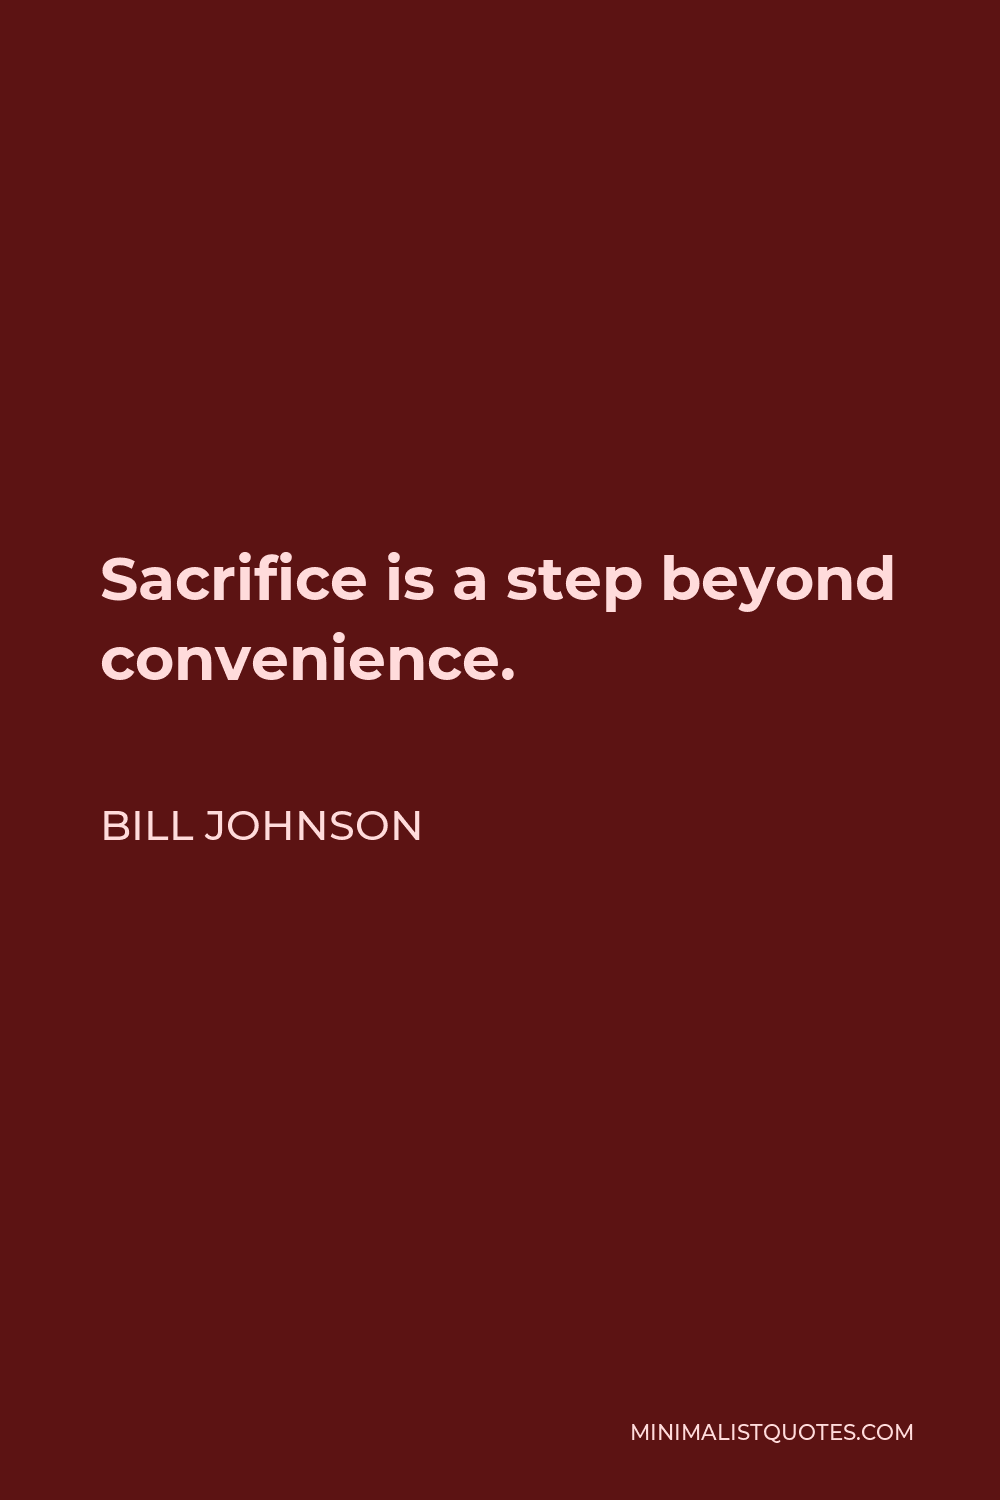 Bill Johnson Quote - Sacrifice is a step beyond convenience.